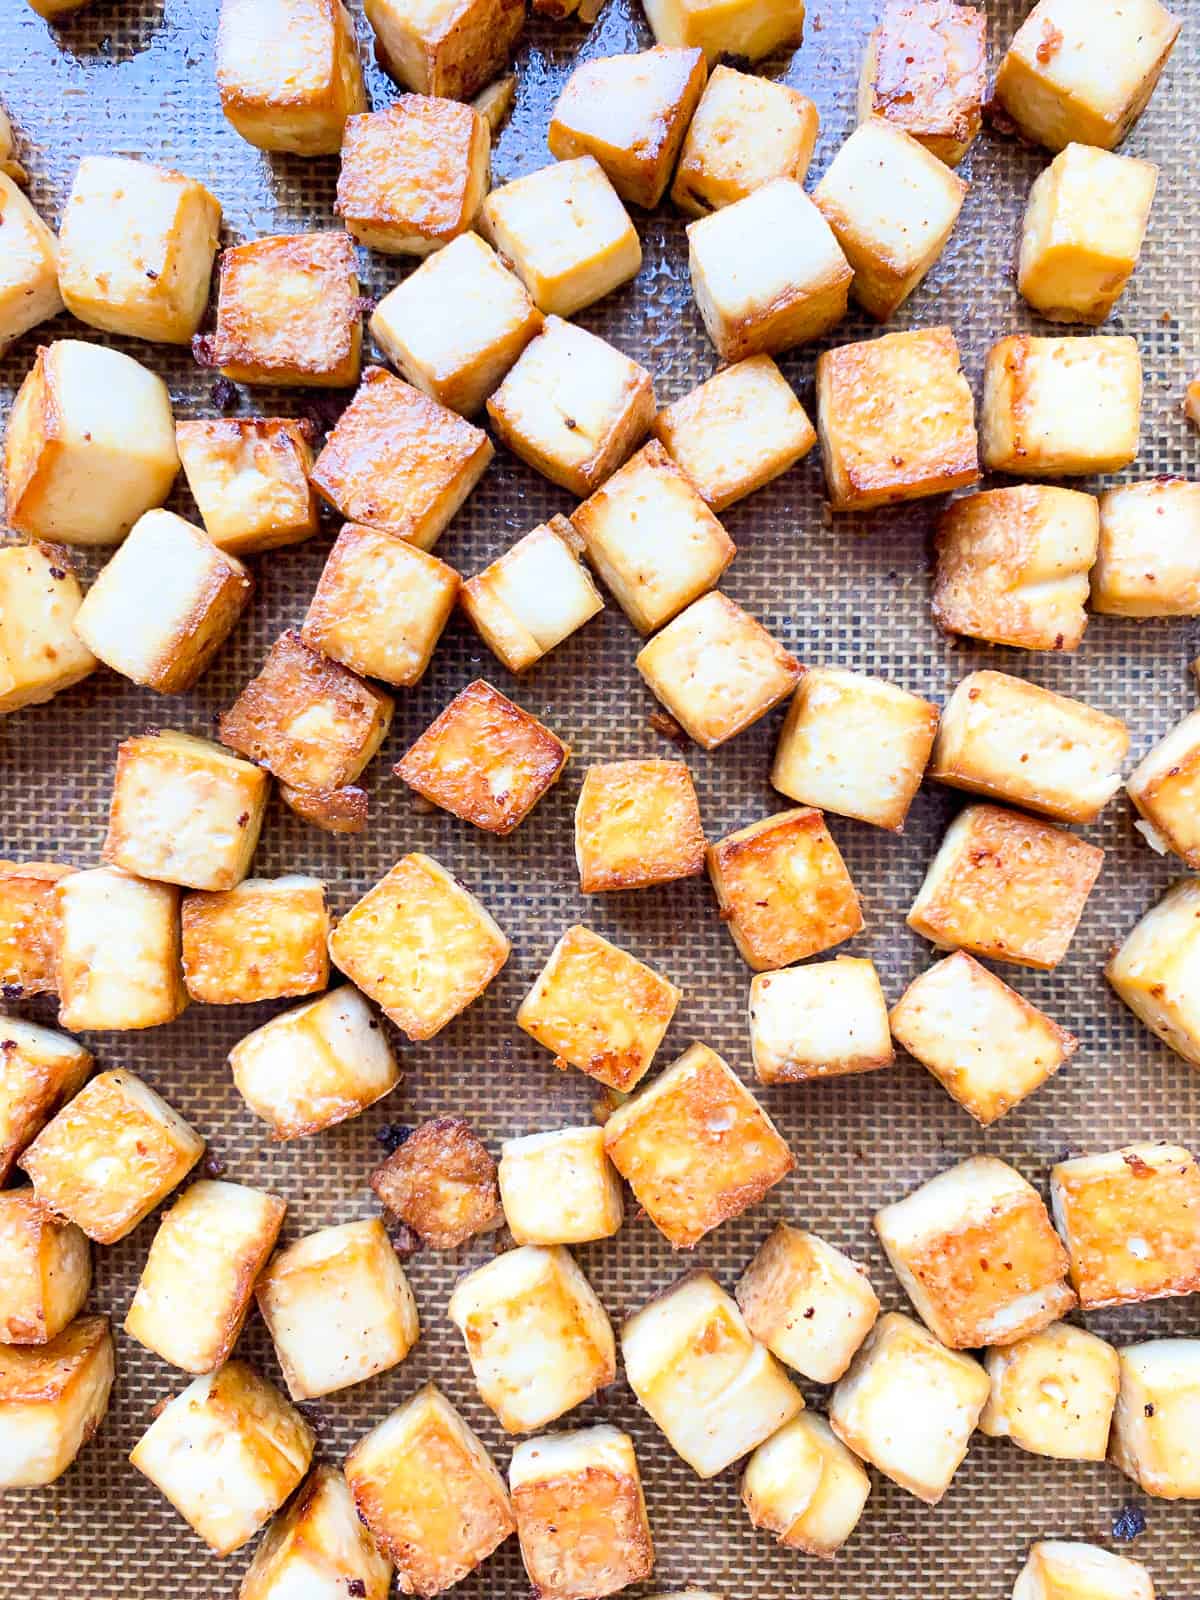 A close up image of baked tofu cubes on a baking tray lined with a silicone mat.